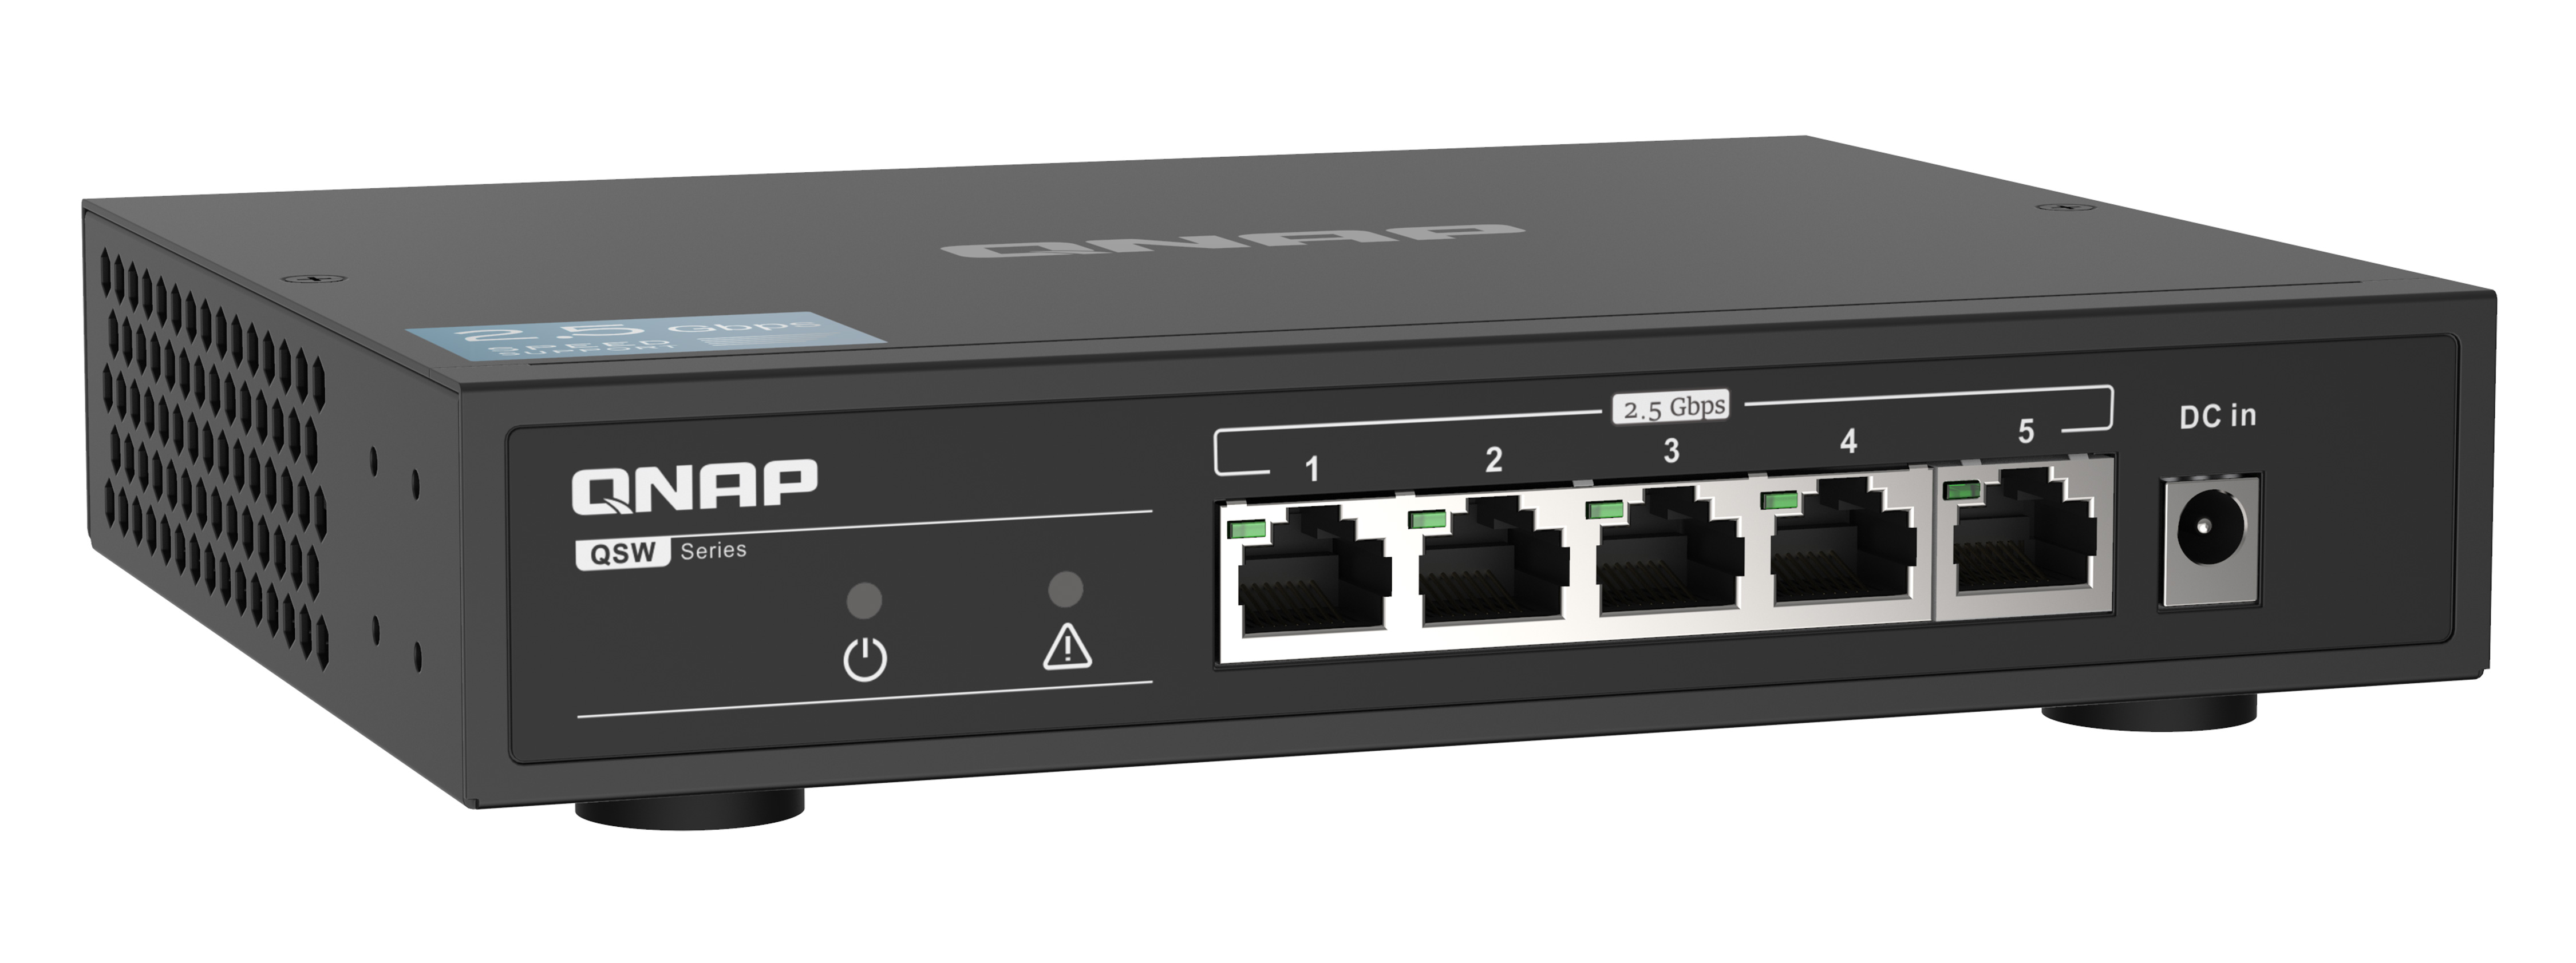 At Last, a 2.5Gbps Consumer Network Switch: QNAP Releases QSW-1105